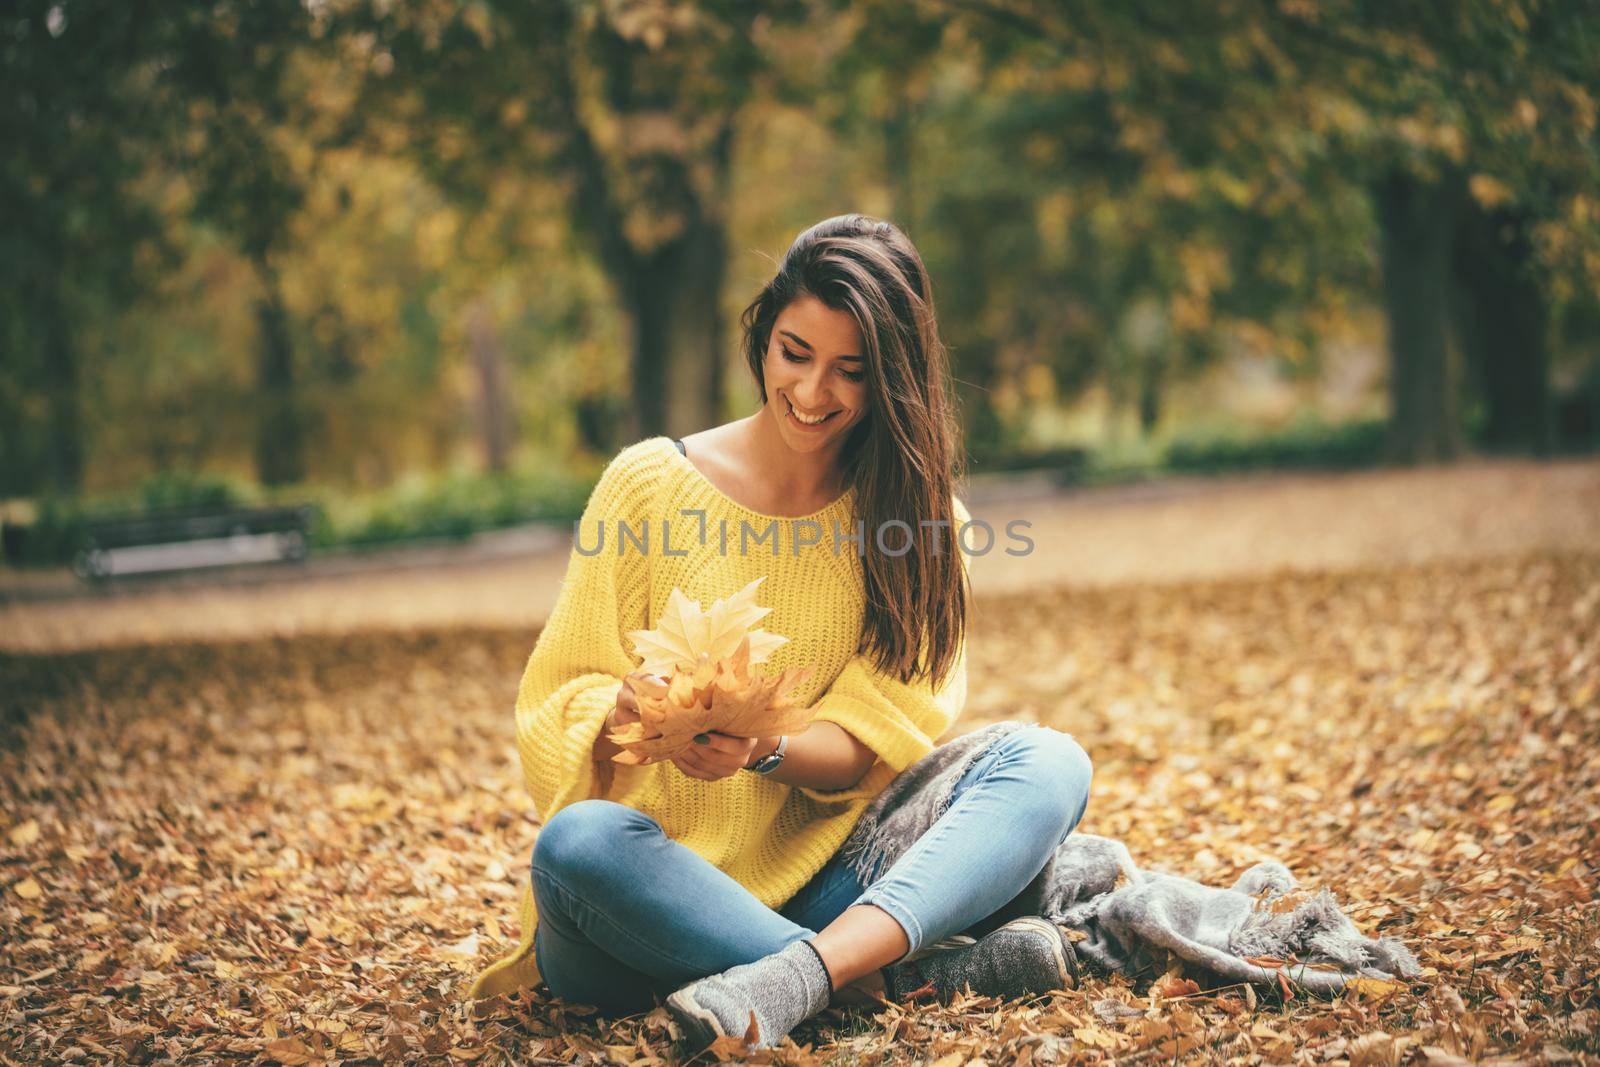 Cute young woman enjoying in sunny forest in autumn colors. She is holding golden yellow leaves and having fun. 